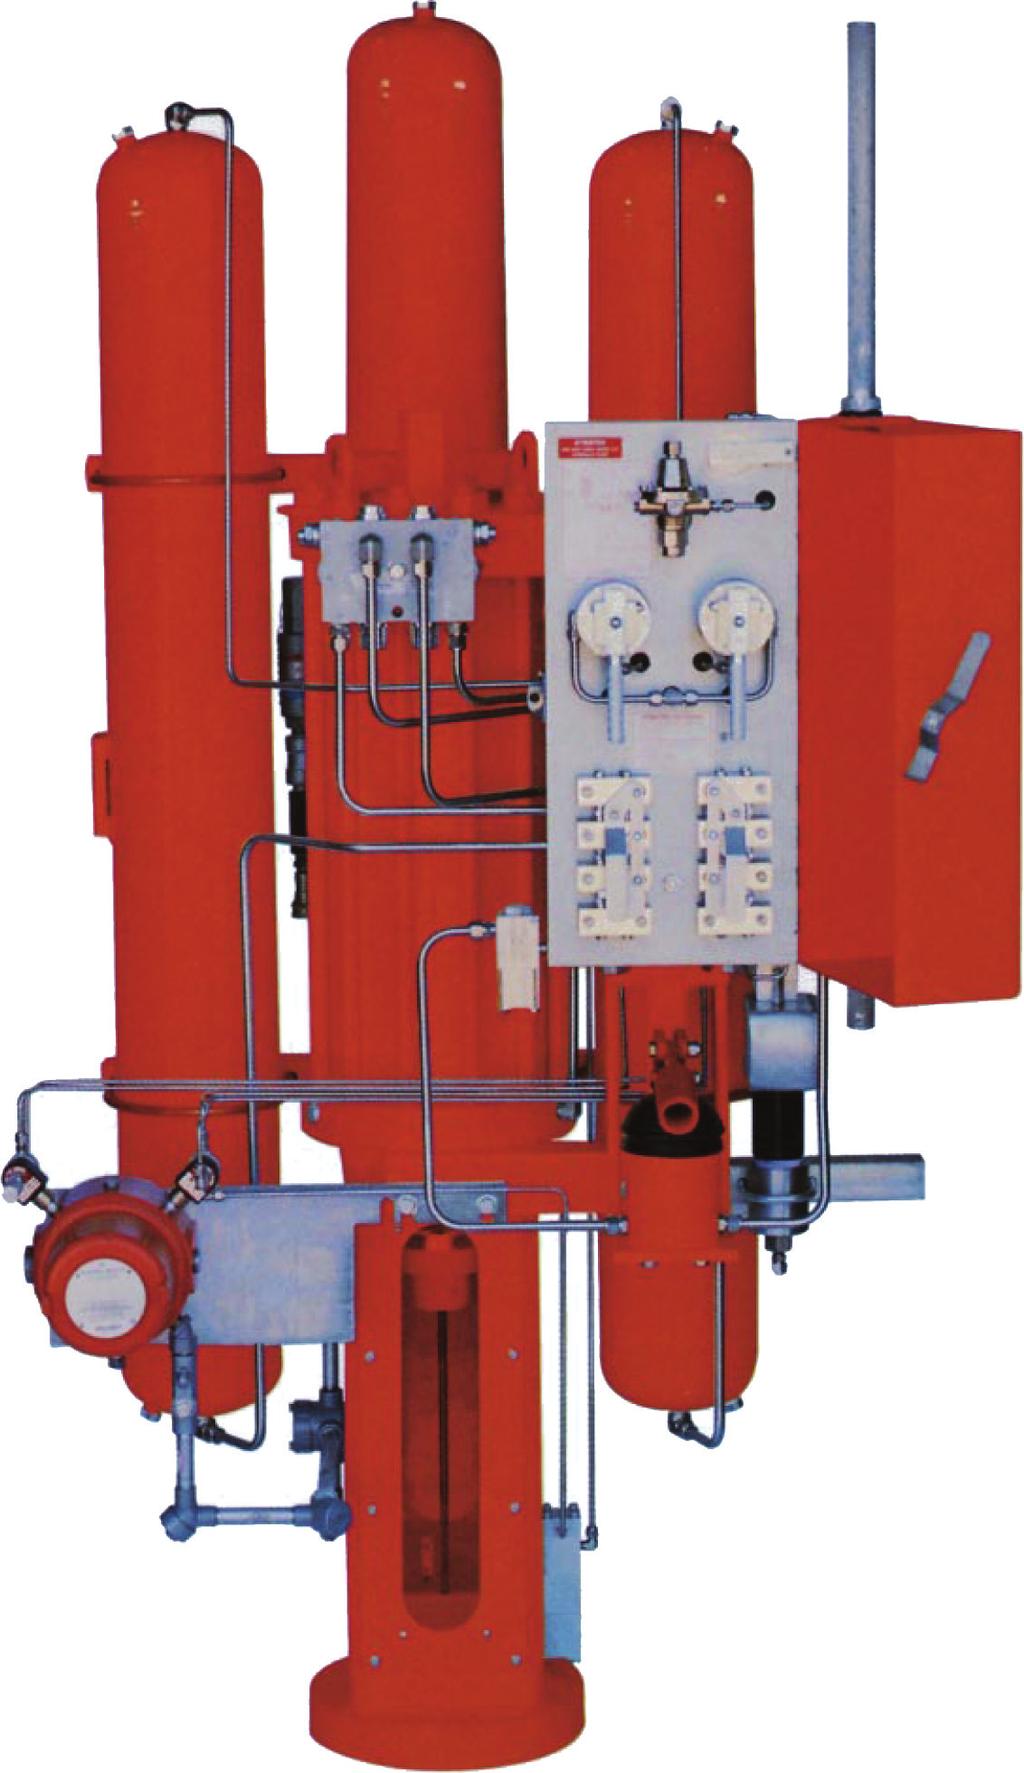 Assembly and Features handle Close Tank safety valve Actuator Control Panel Open Tank (hidden) Optional Volume Tank Quarter-Turn Operators Incorporates a scotch-yoke design for converting linear